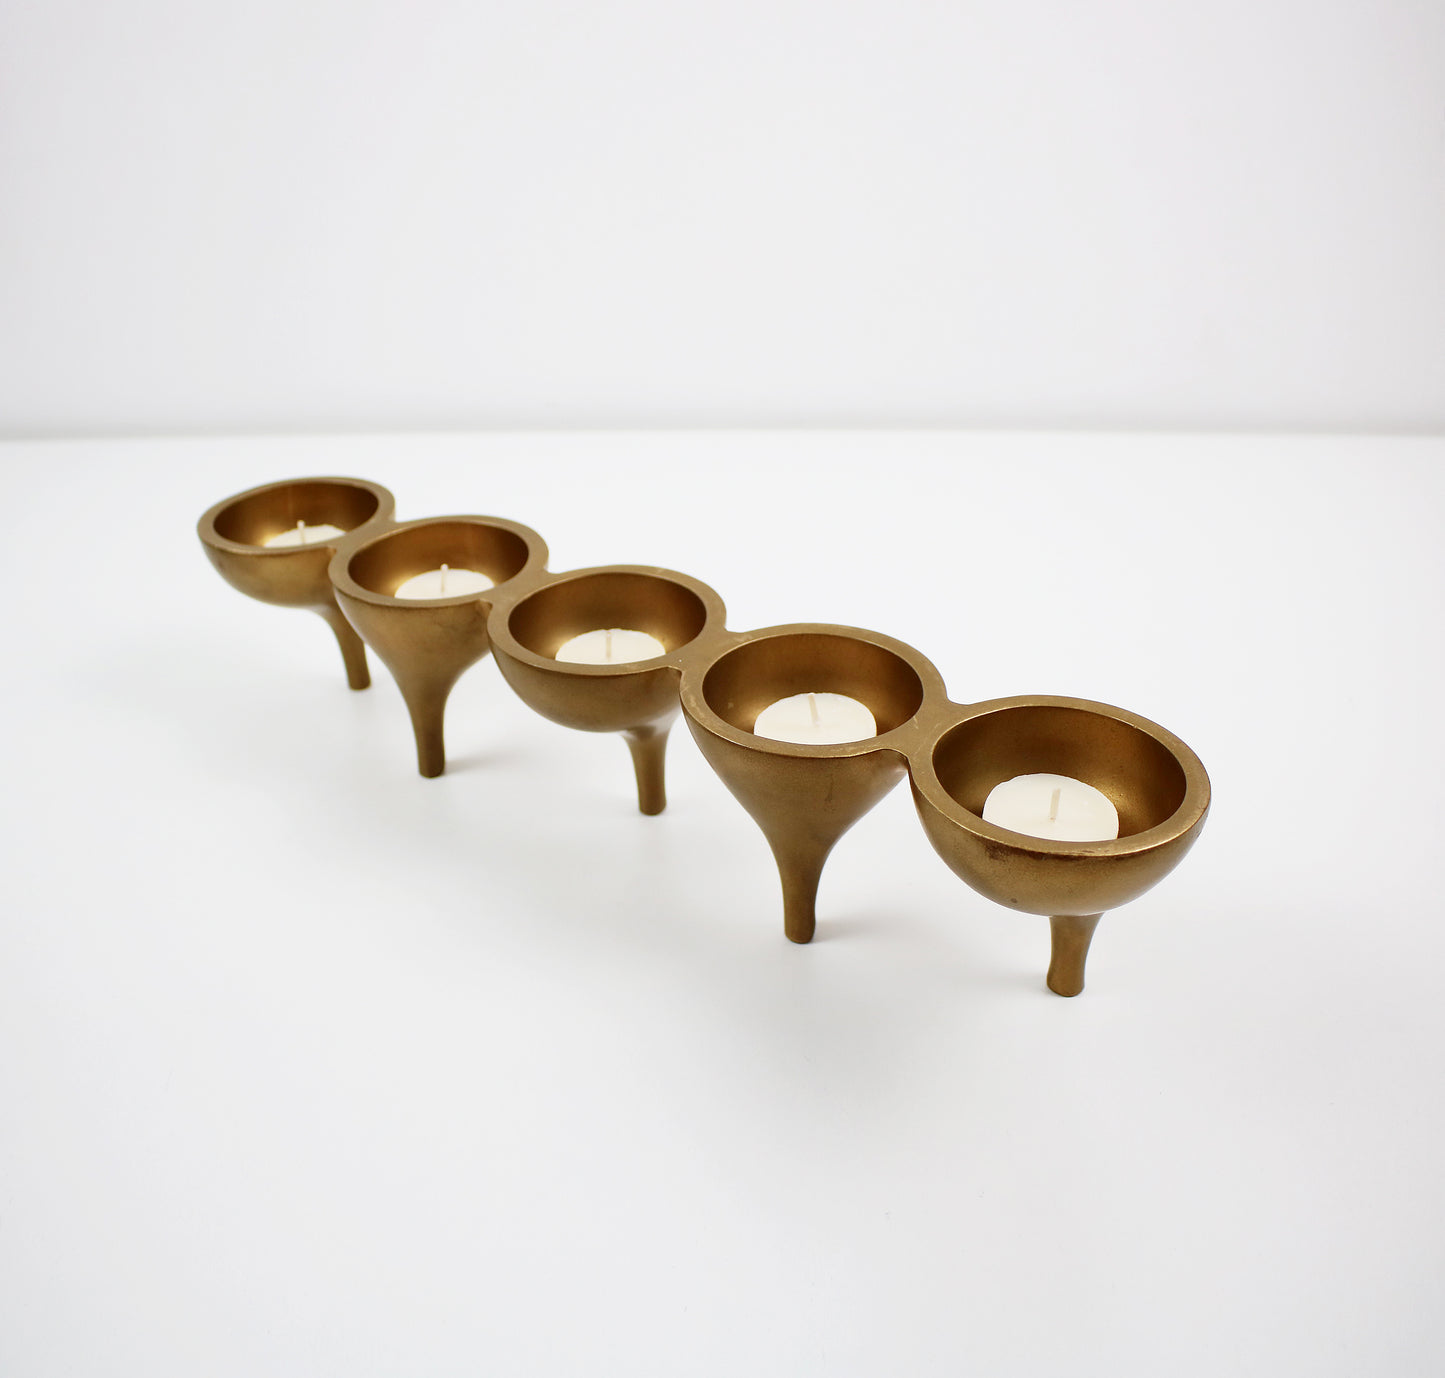 Contemporary preloved tealight candle holder - gold metal